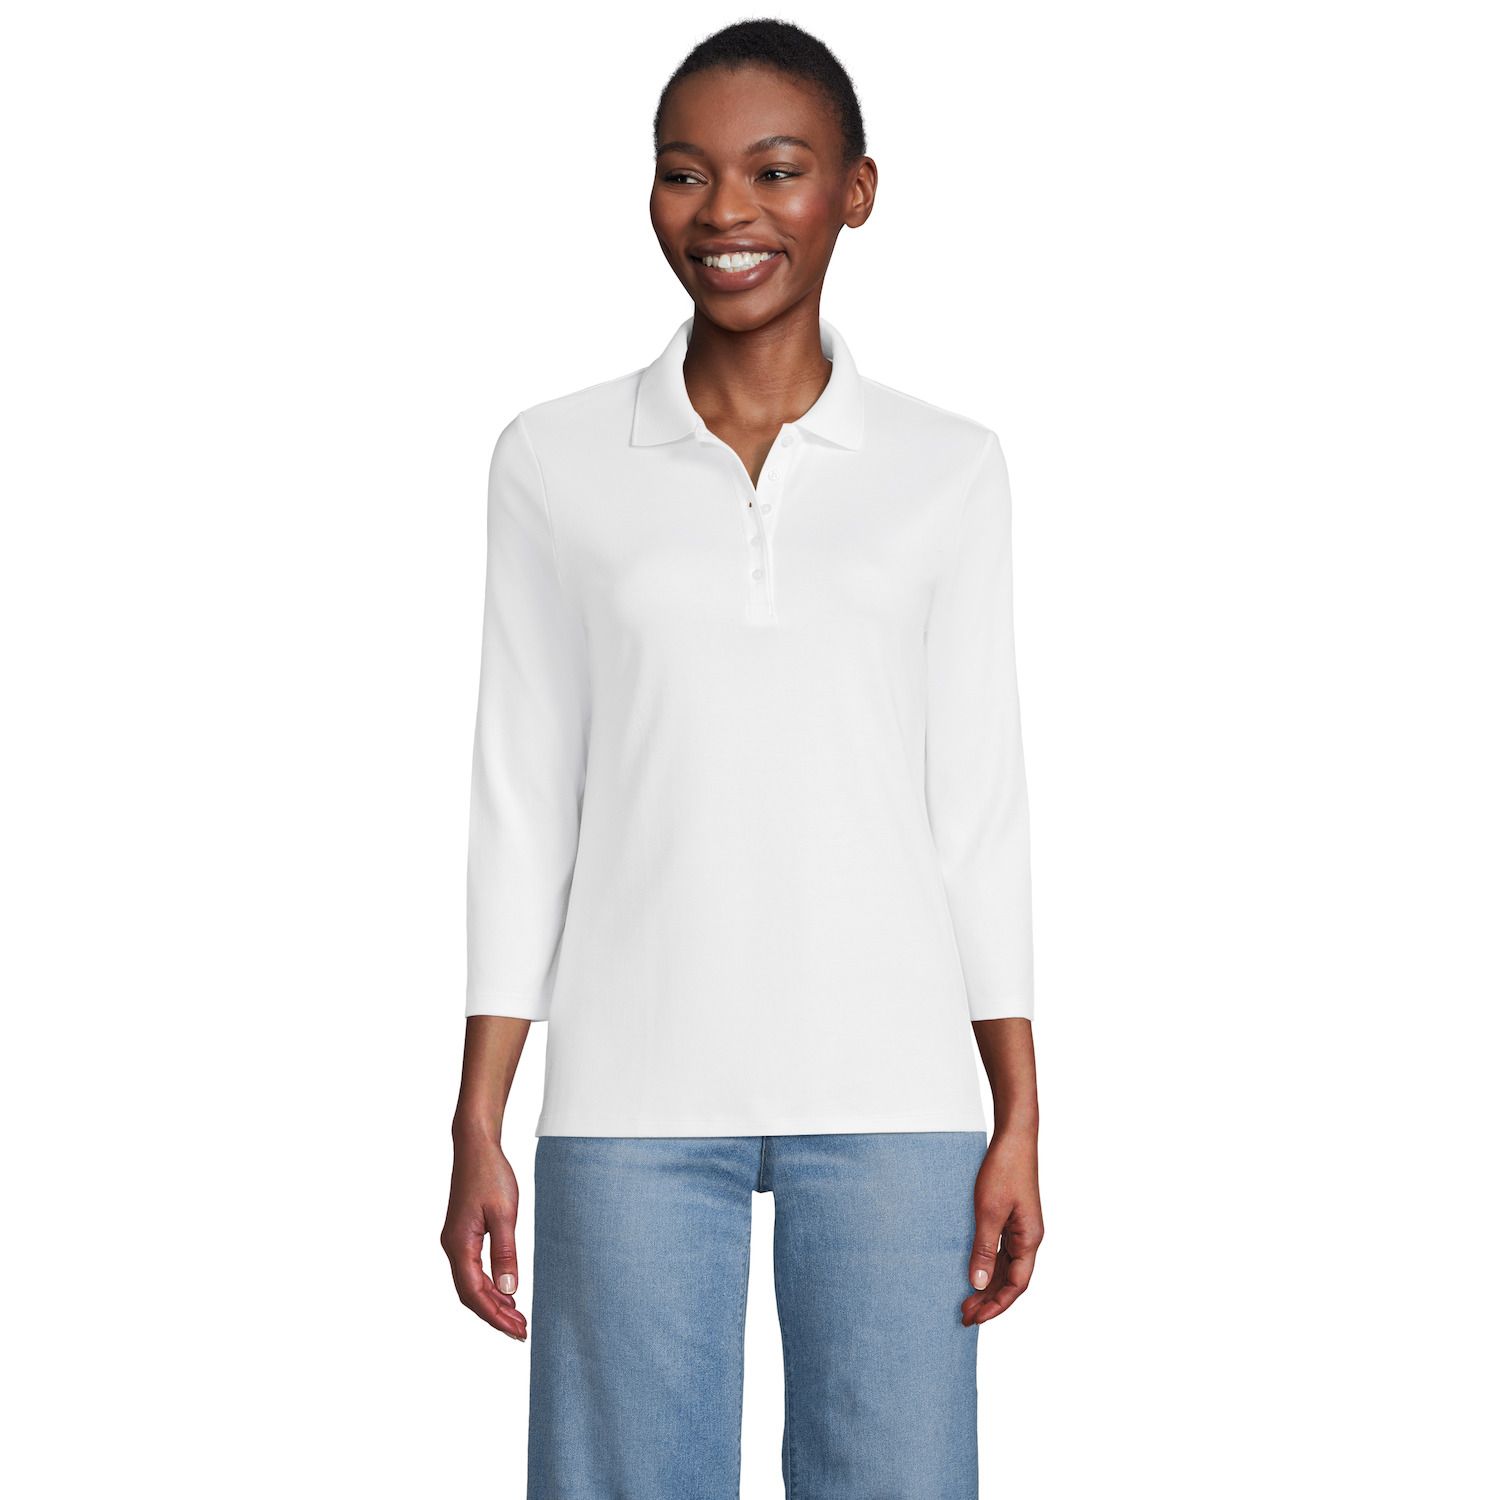 Image for Lands' End Petite Supima Cotton 3/4 Sleeve Polo Shirt at Kohl's.